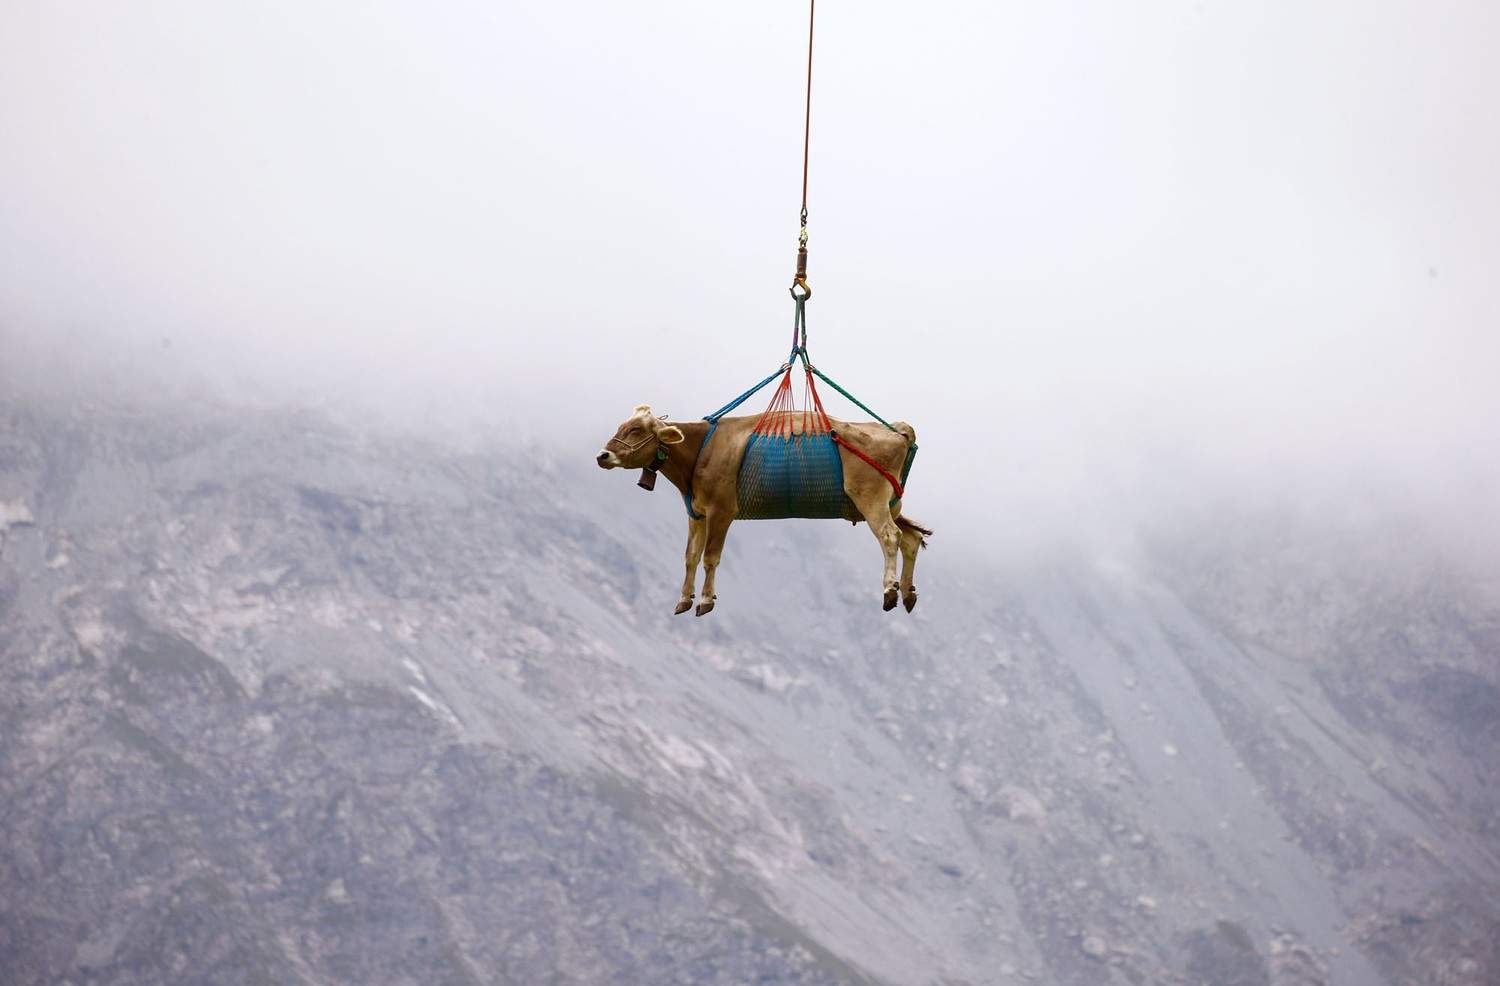 Alpine helicopter cow